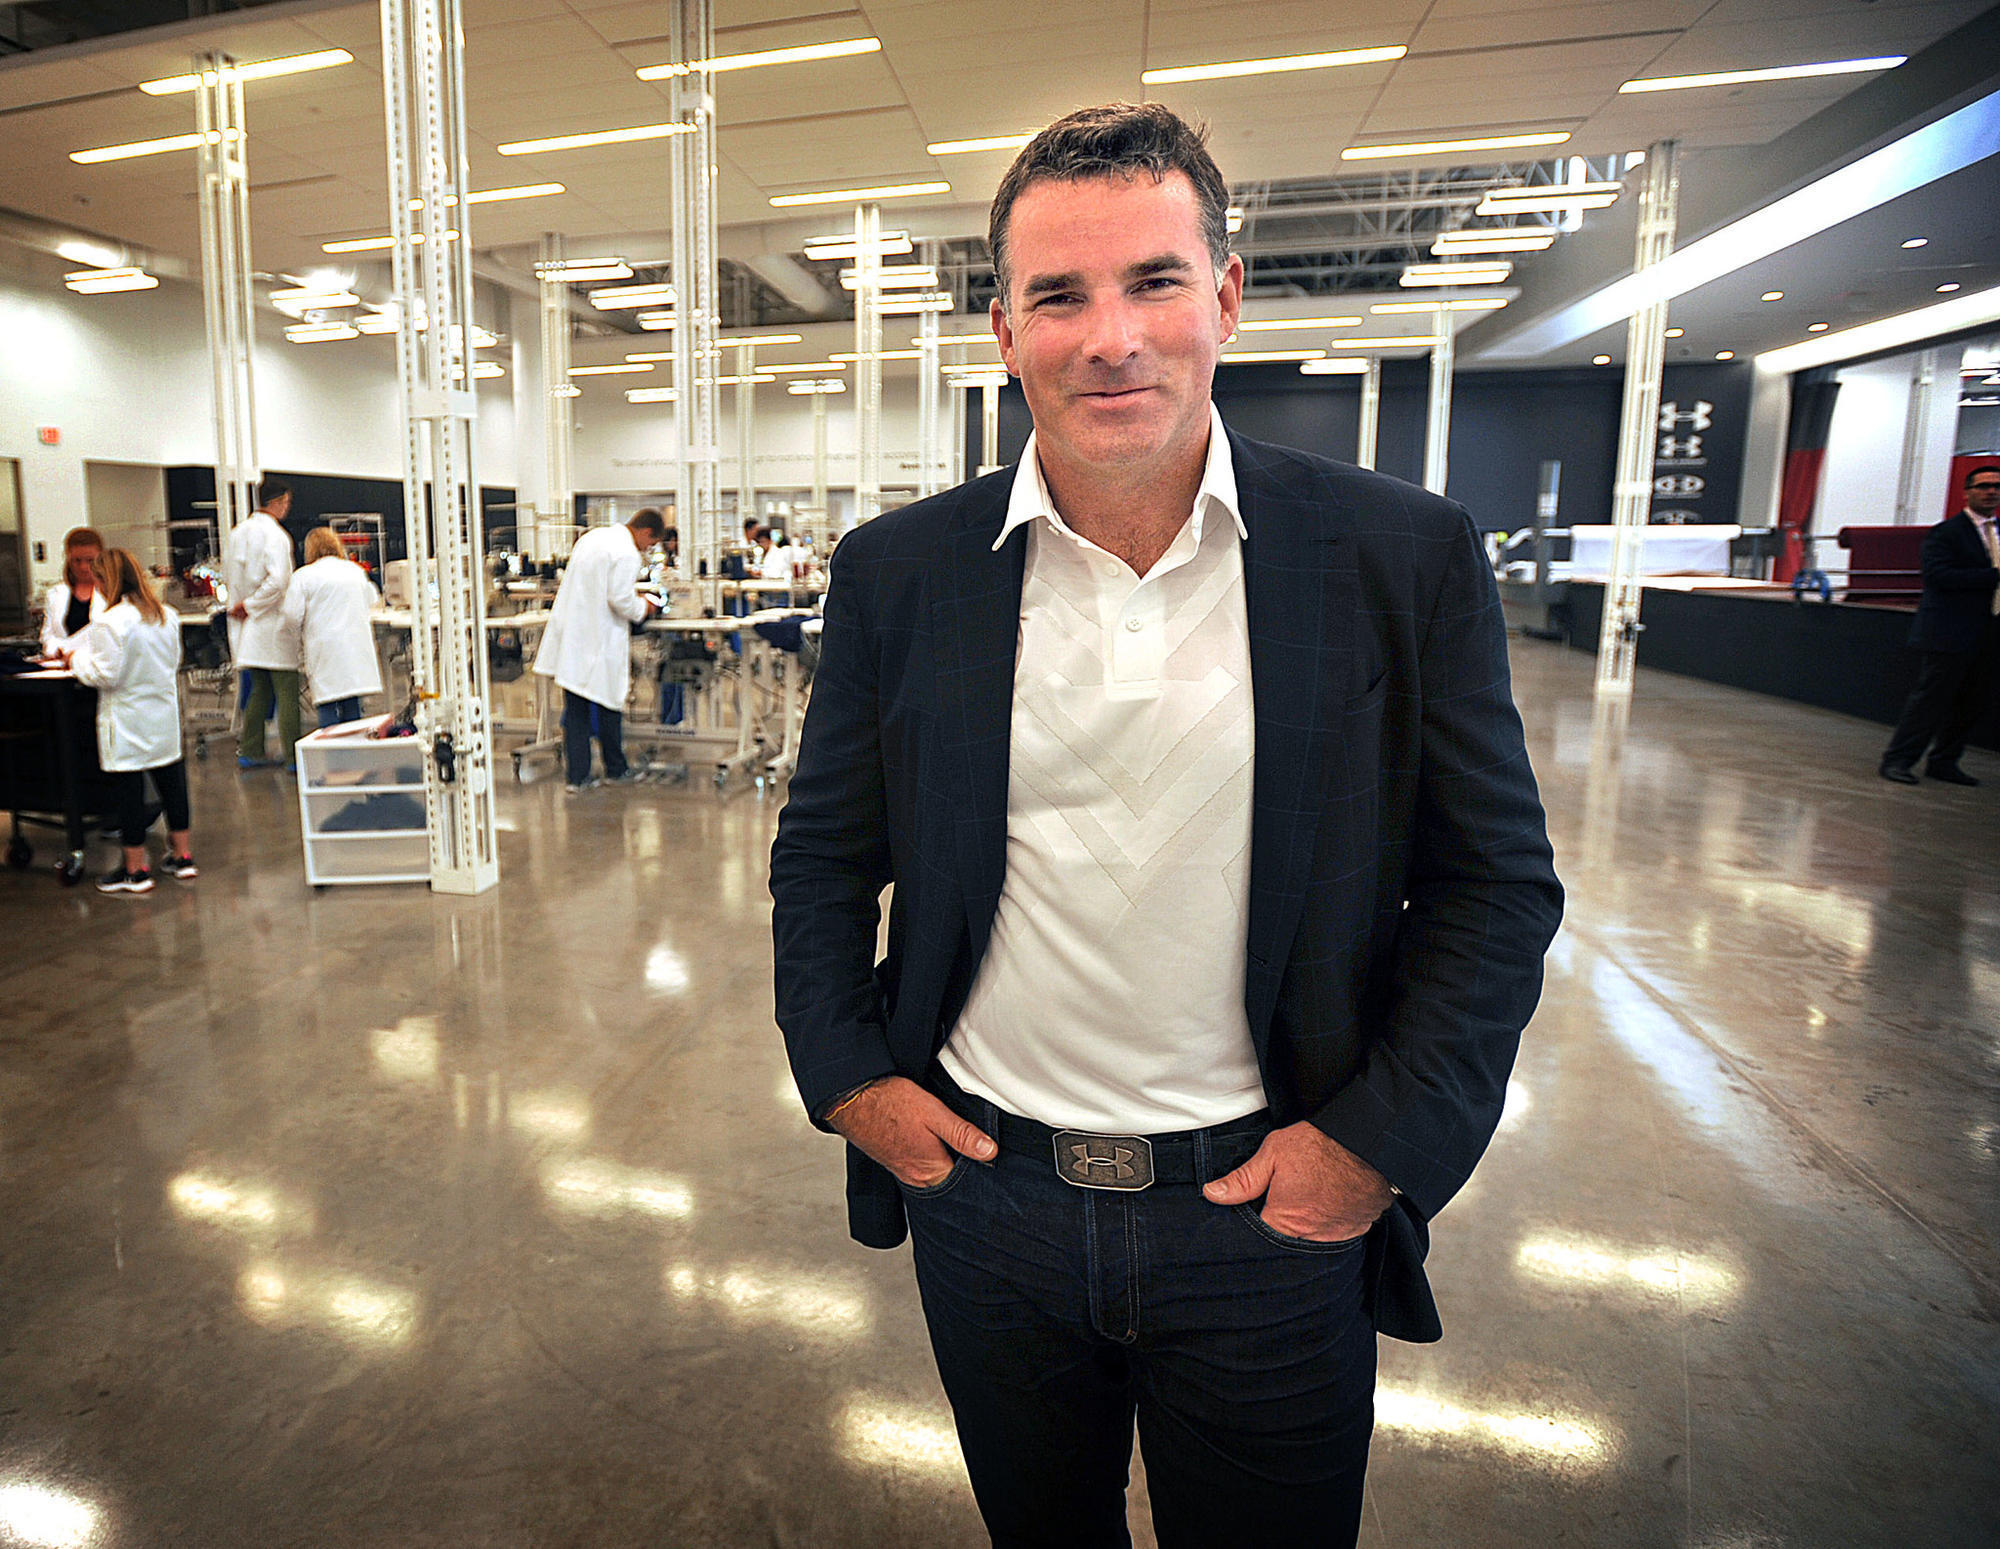 Under Armour founder Kevin Plank lands on a 'Worst CEOs' list - Baltimore Sun2000 x 1549